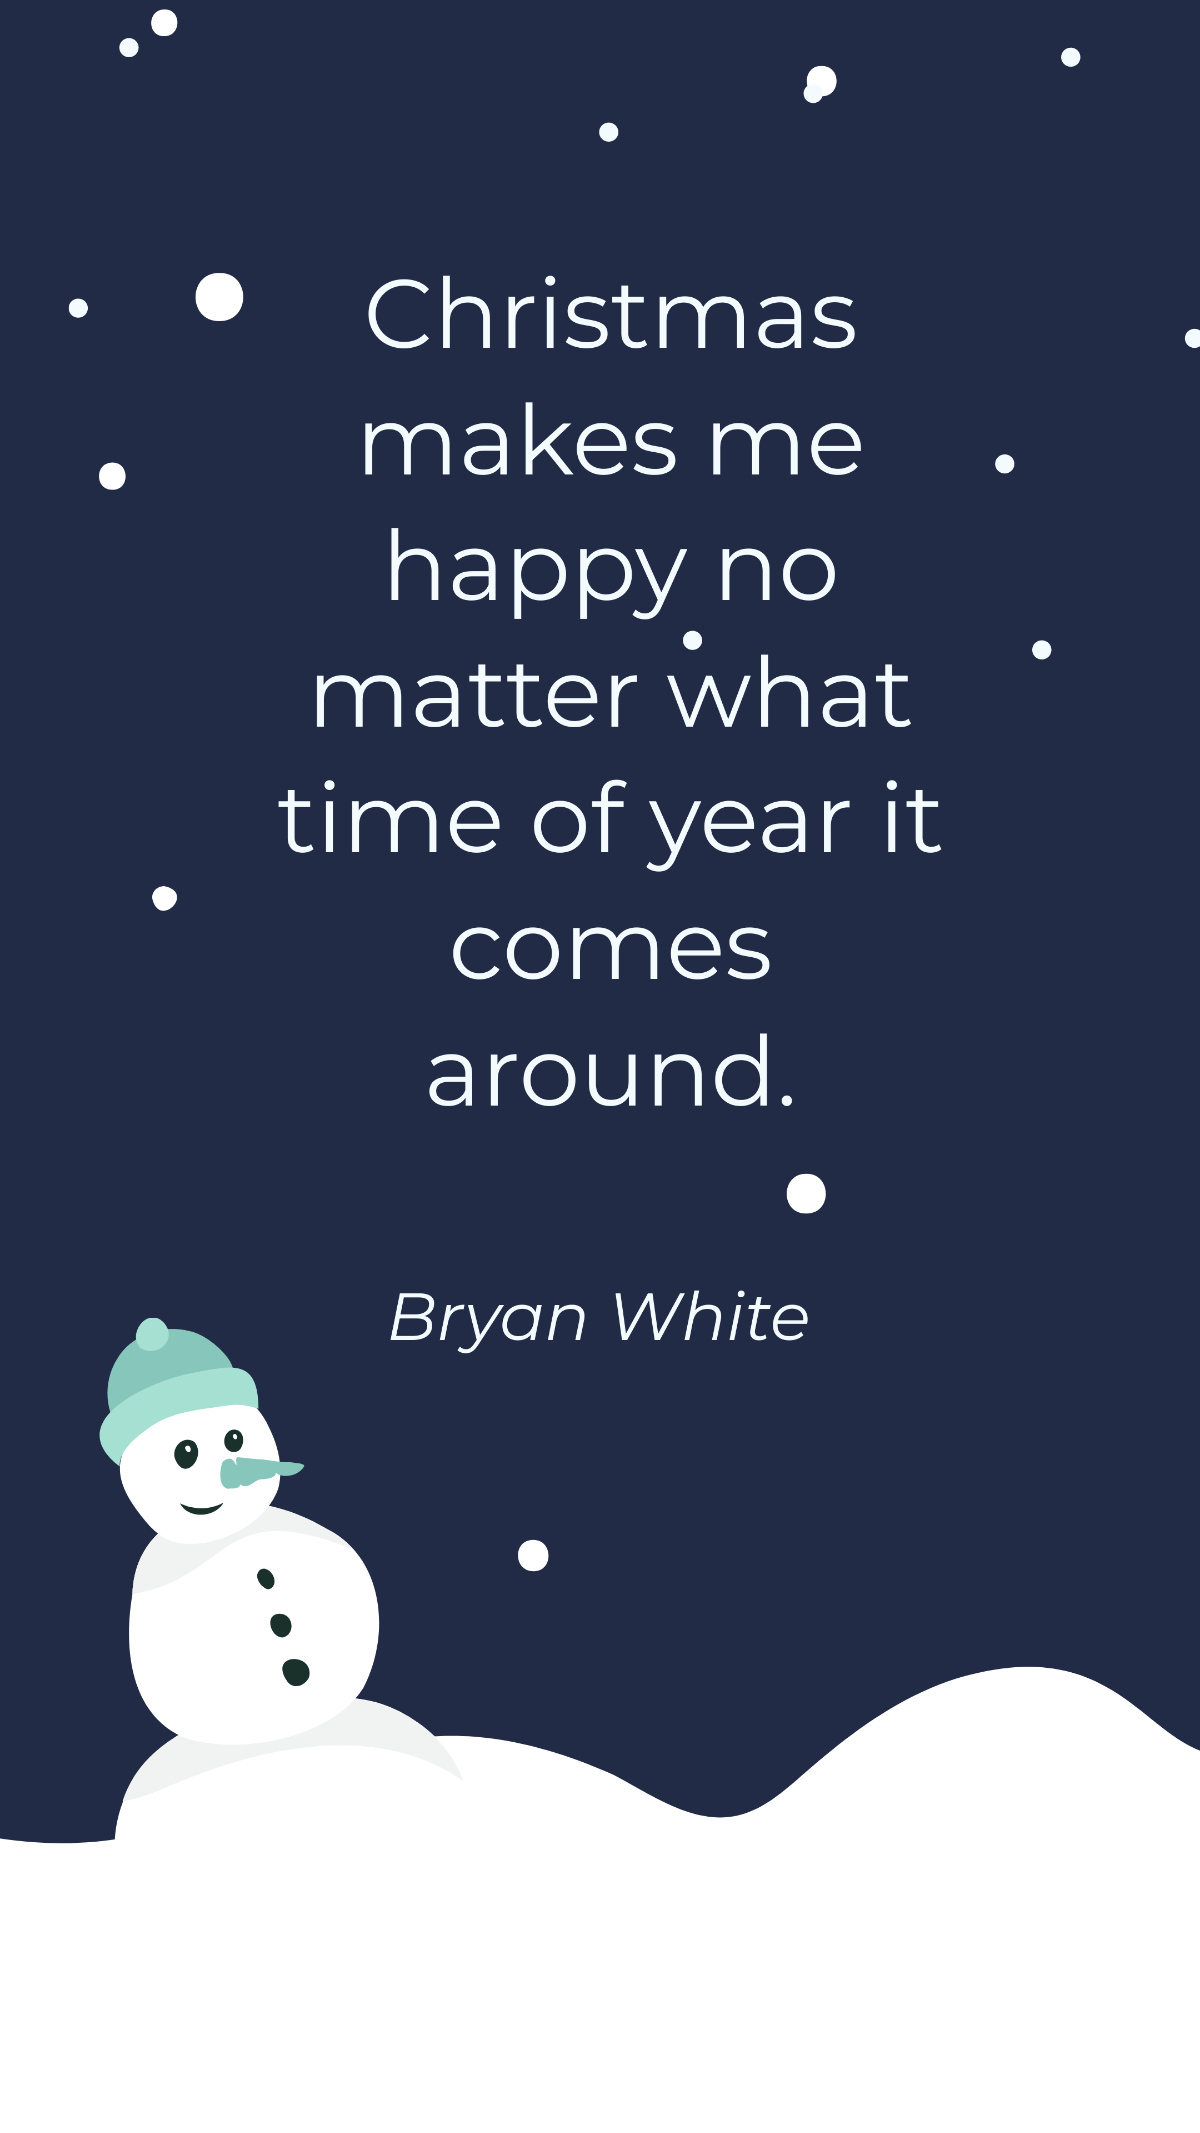 Bryan White - Christmas makes me happy no matter what time of year it comes around. Template